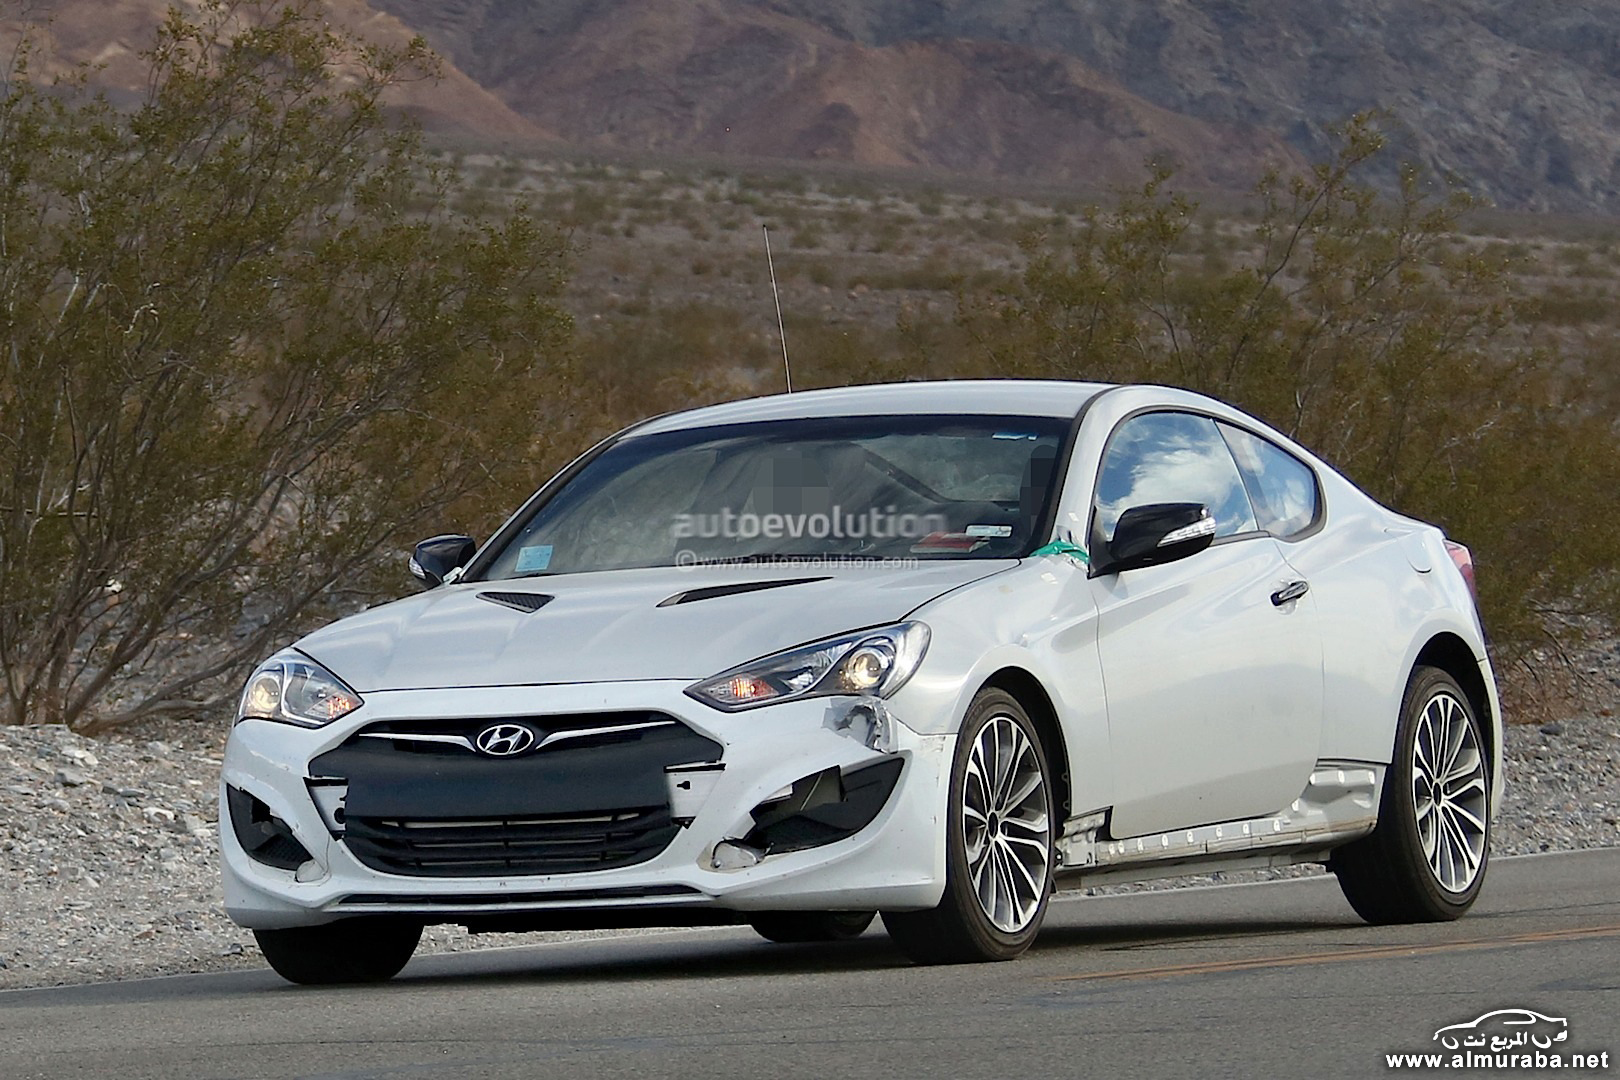 new-2017-hyundai-genesis-coupe-spied-for-the-first-time_8